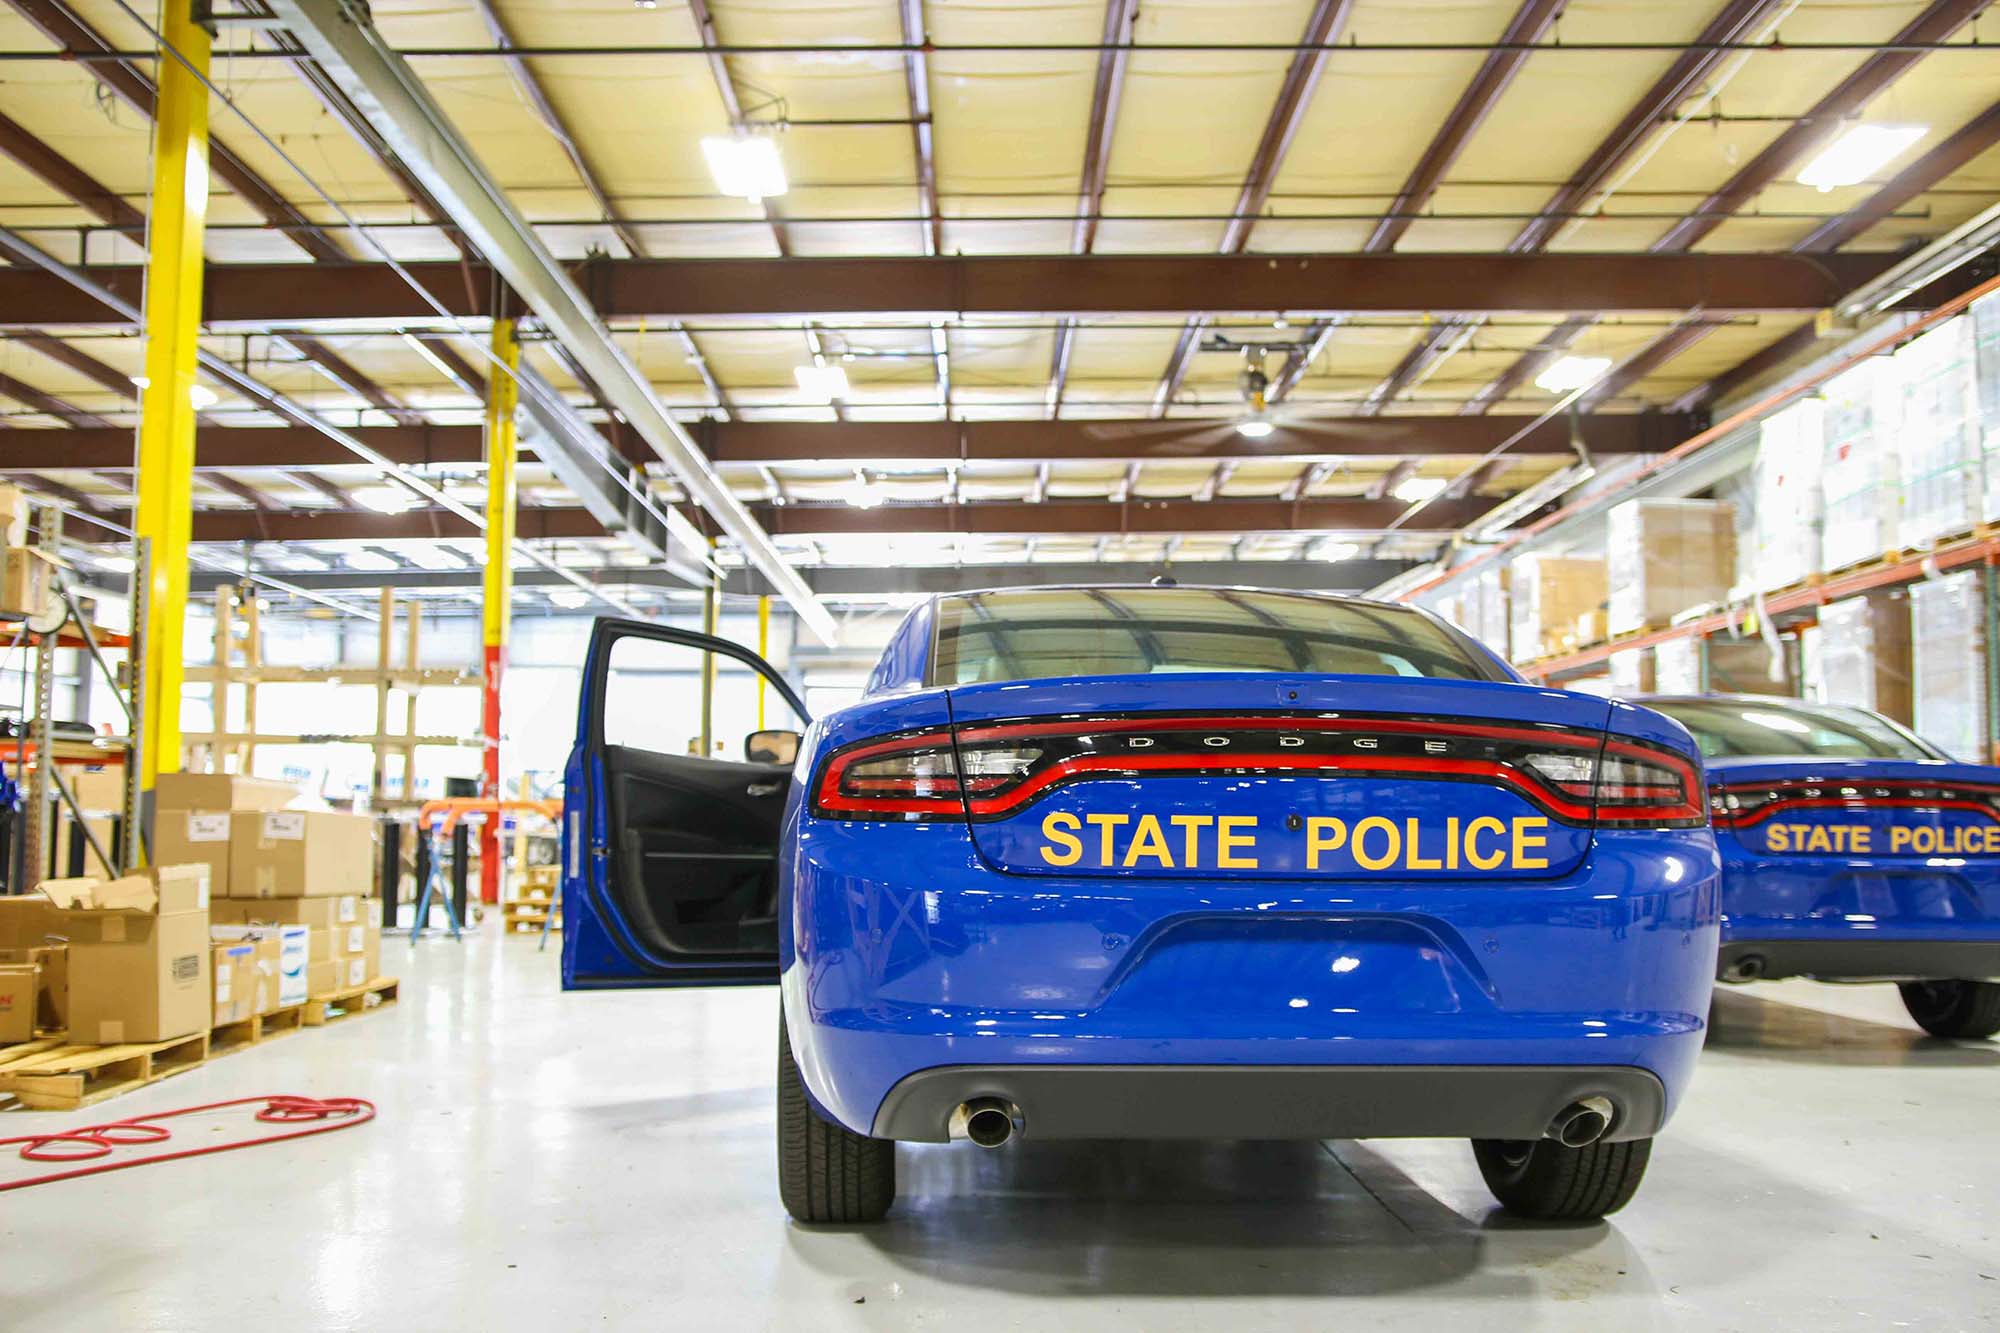 The back of a Custom Police Vehicle